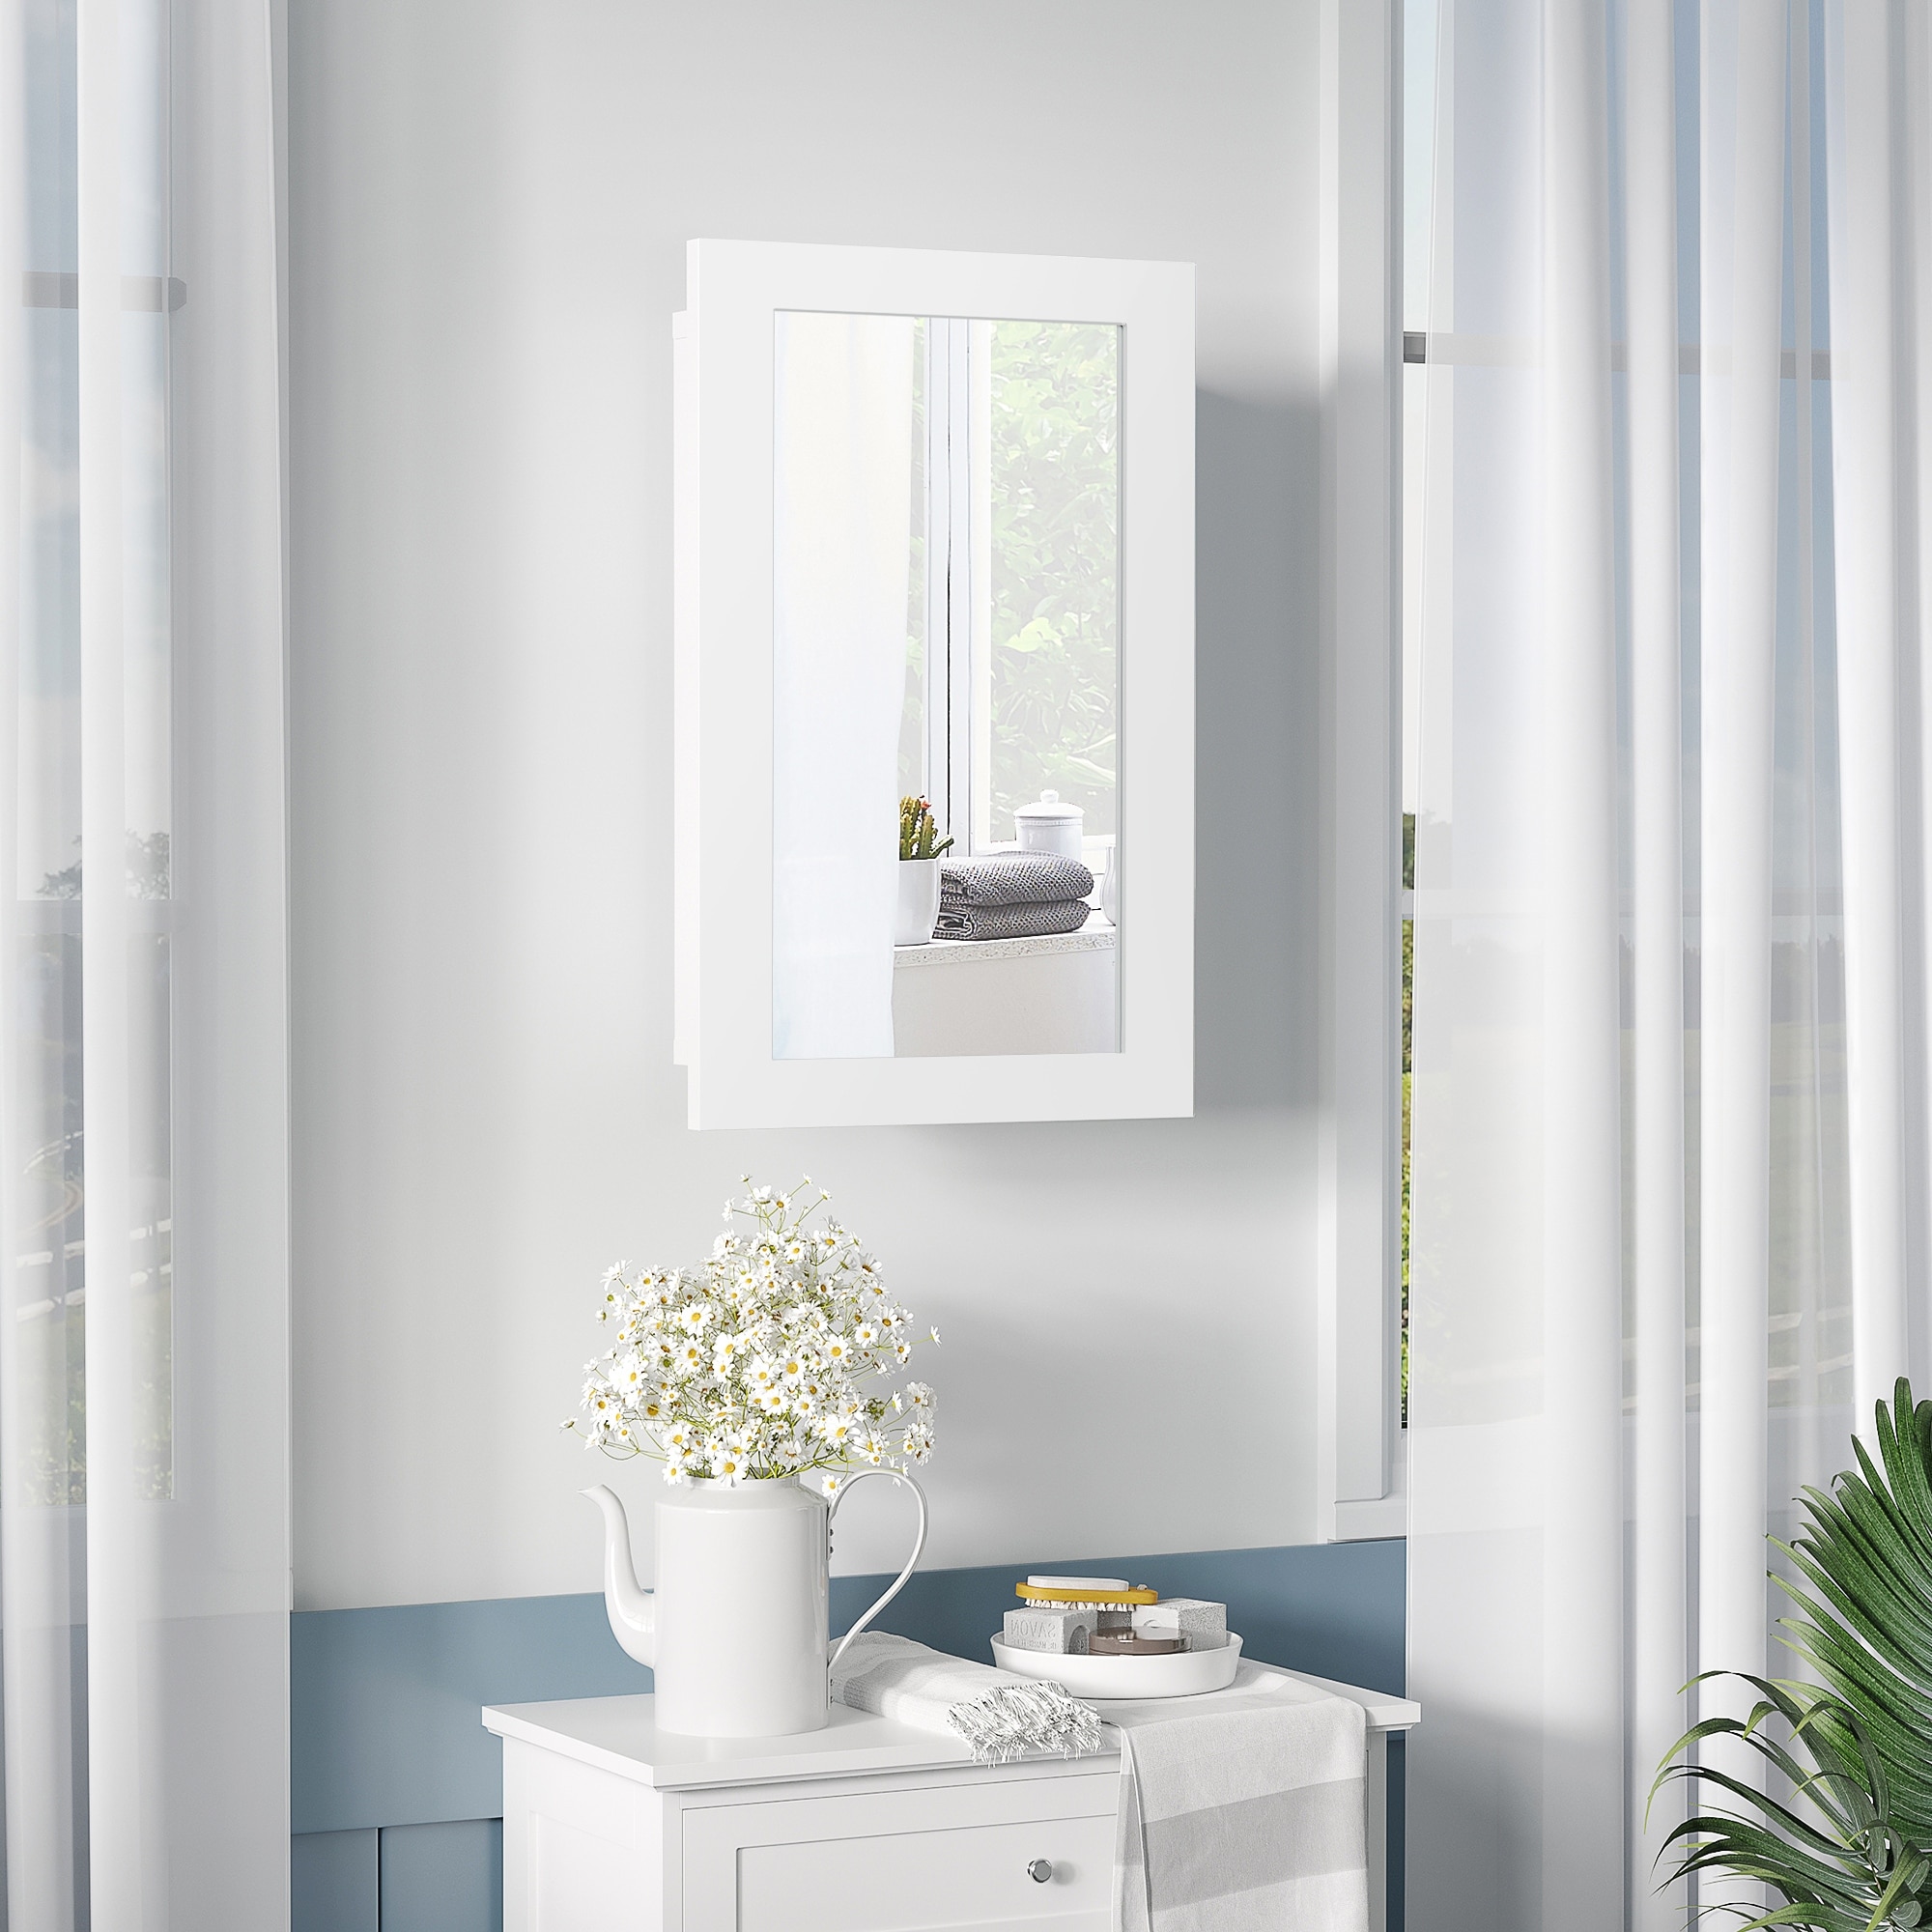 https://ak1.ostkcdn.com/images/products/is/images/direct/37023272bd13f592ba0be7c246447b7f4f2c53c6/kleankin-Wall-Mounted-Medicine-Cabinet-with-Mirror%2C-Bathroom-Mirror-Cabinet-with-Single-Door-and-Adjustable-Shelves%2C-White.jpg